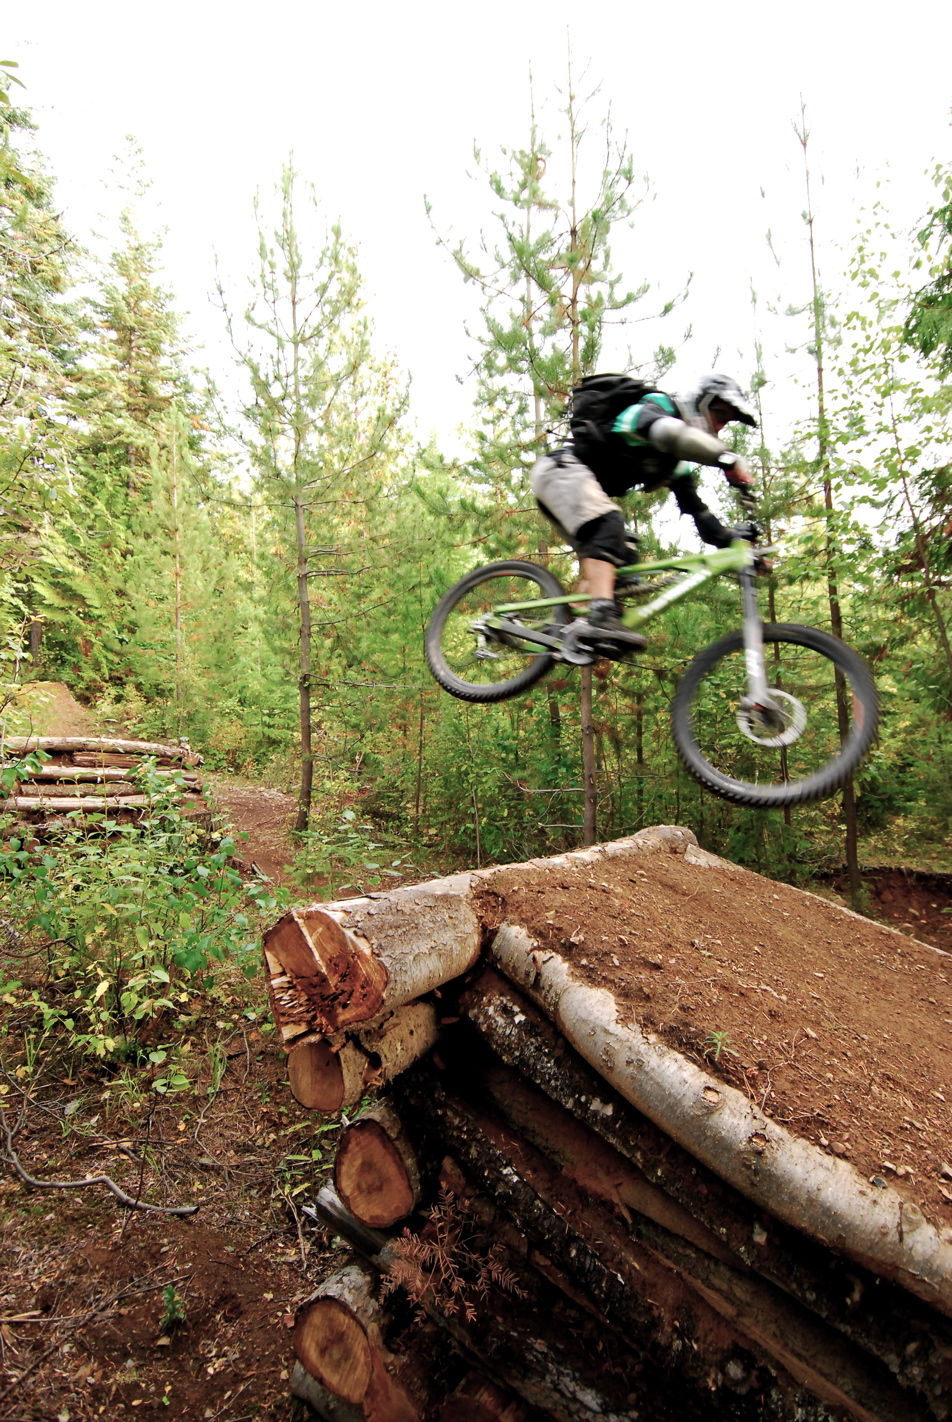 a person jumping a dirt bike over logs in the woods